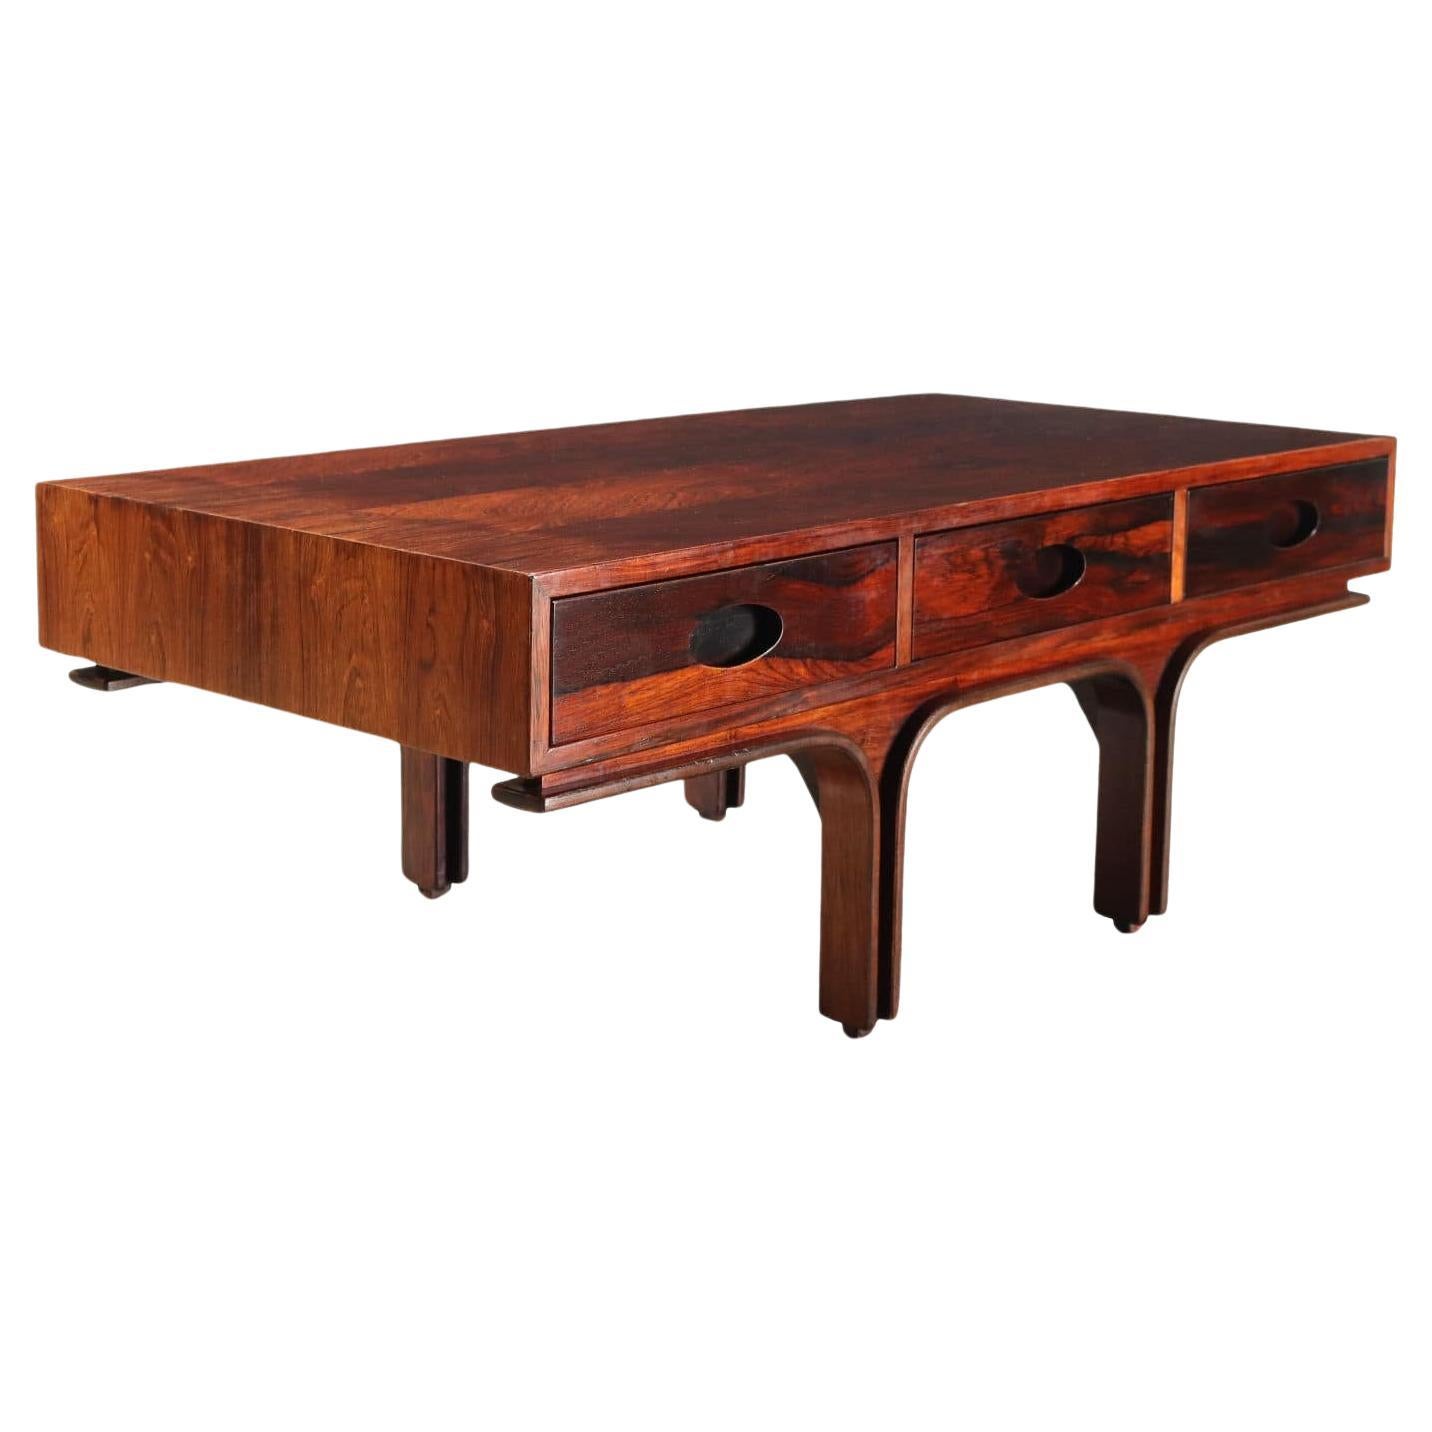 Gianfranco Frattini Coffee Table with Three Drawers for Bernini, 1960s in wood